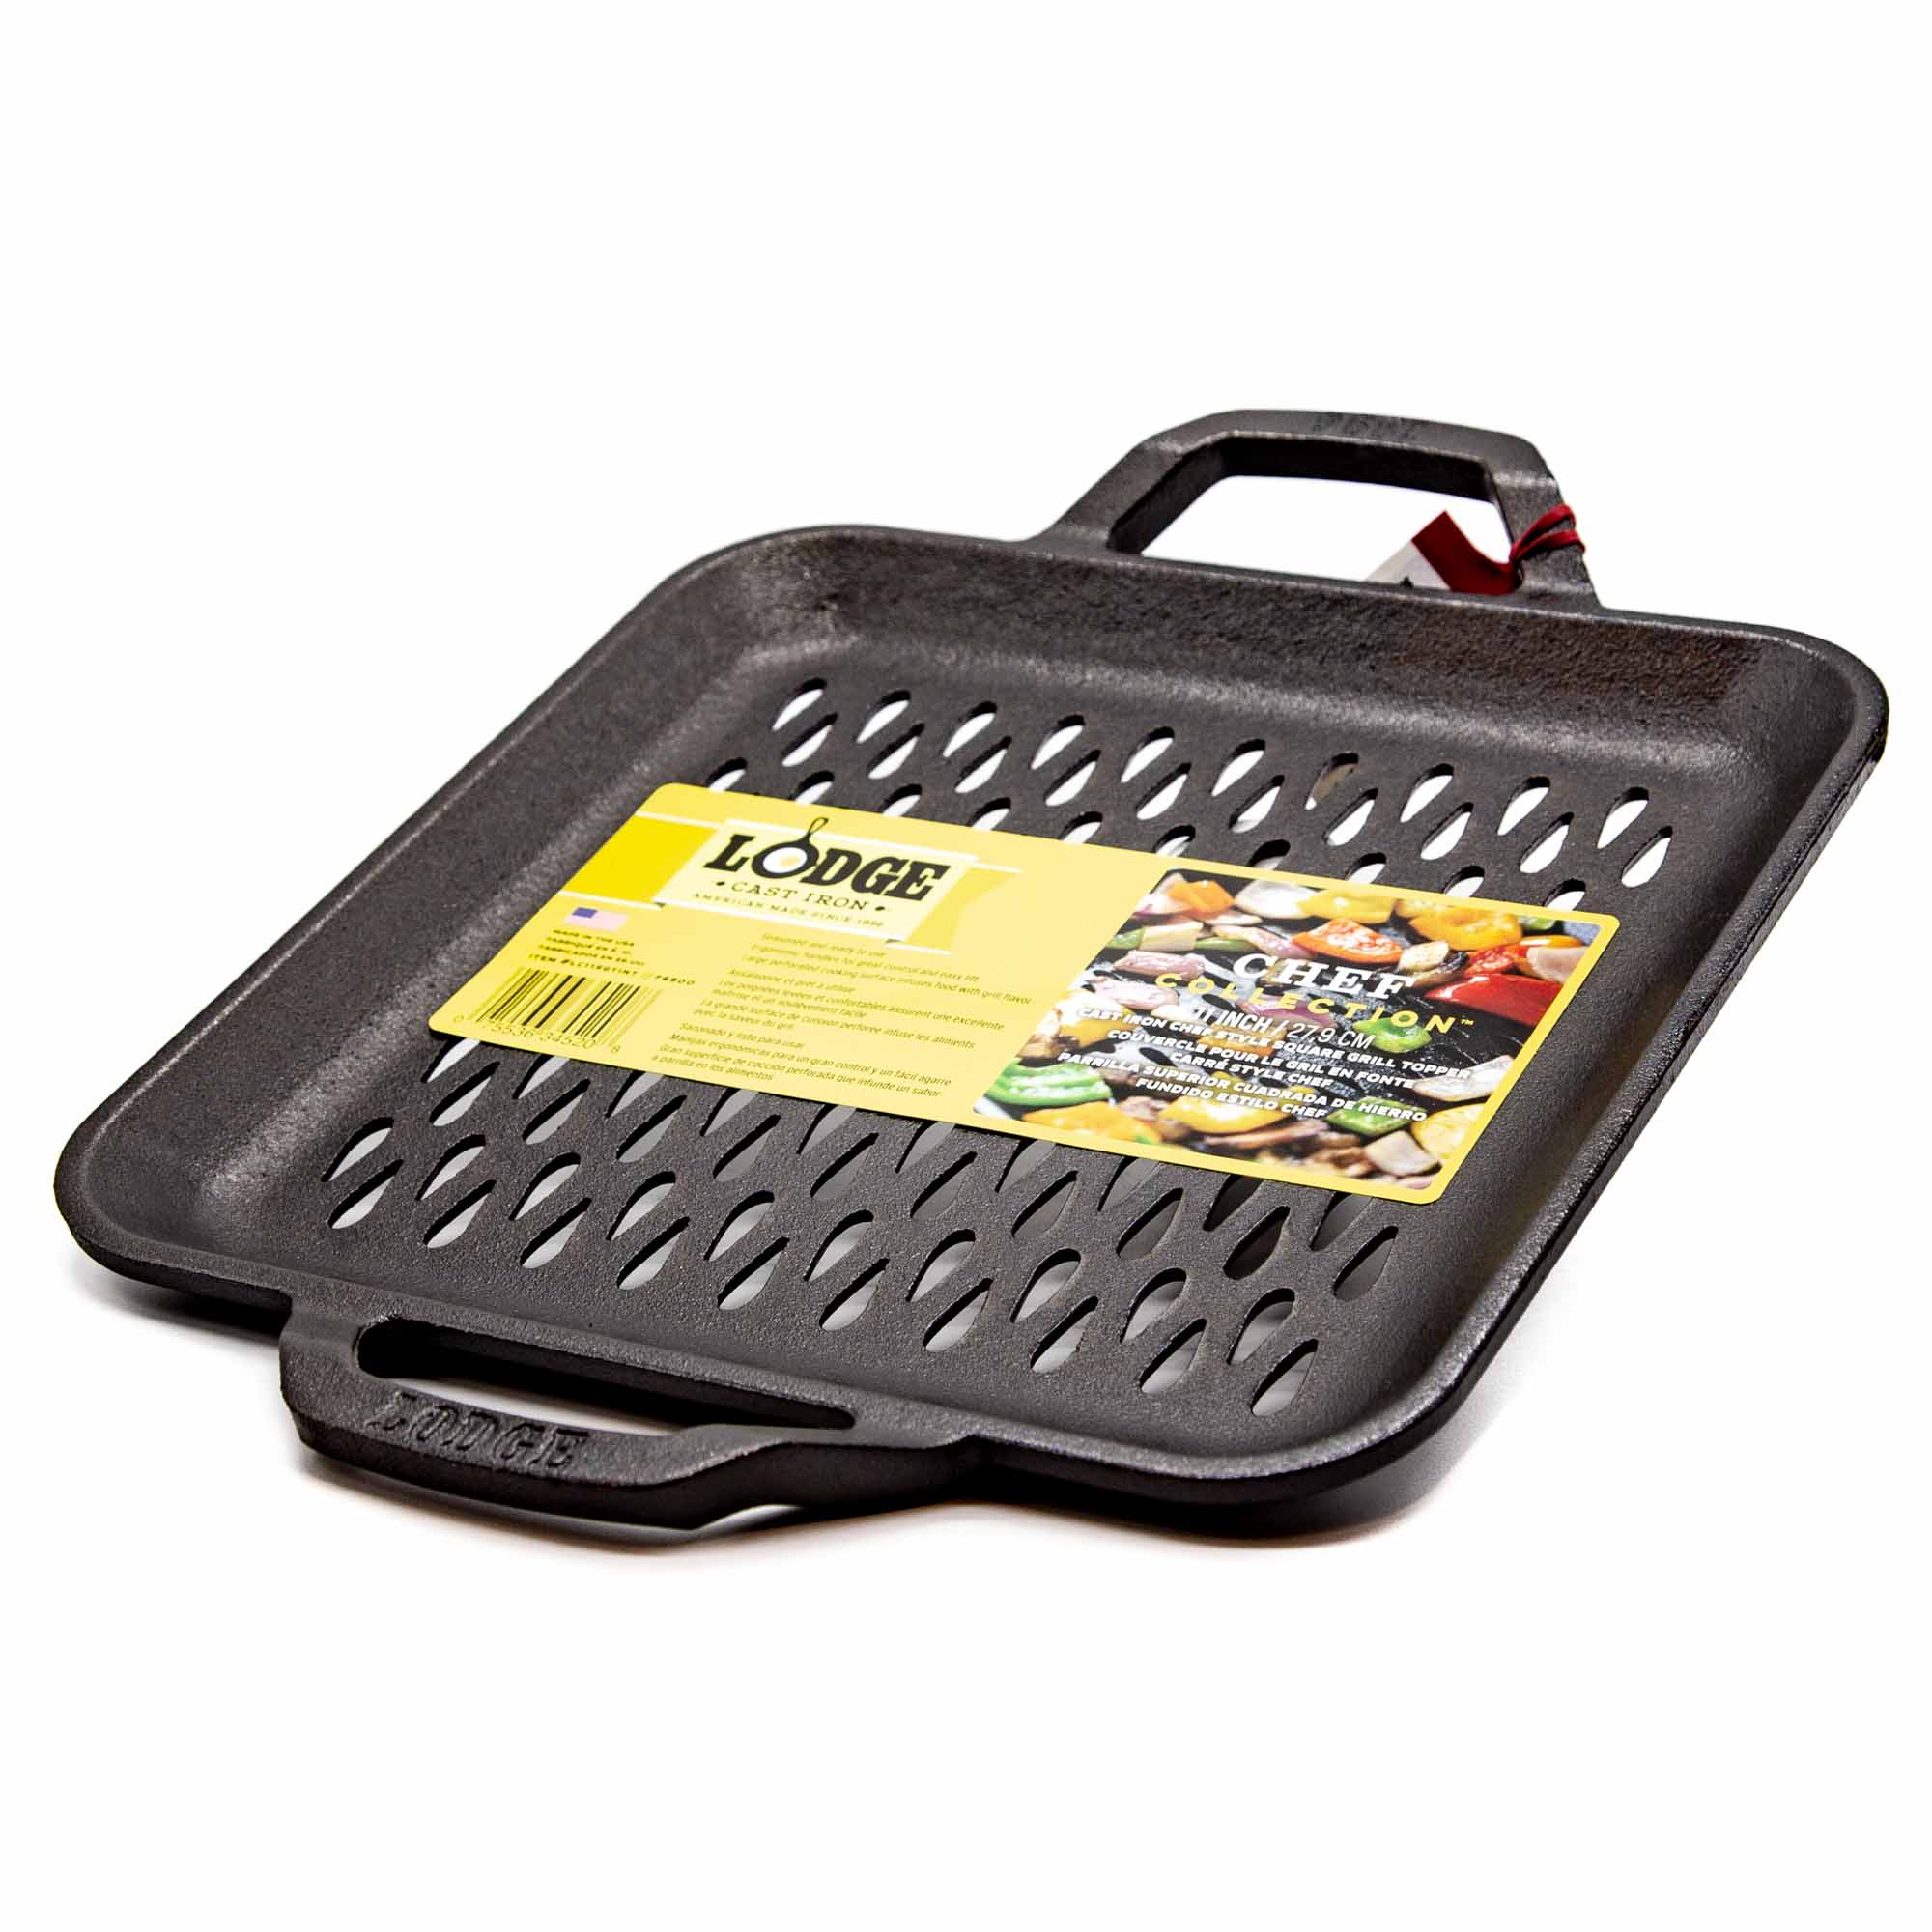 Lodge Chef Collection Grill Pan, Cast Iron, Chef Style, Square, 11 Inch